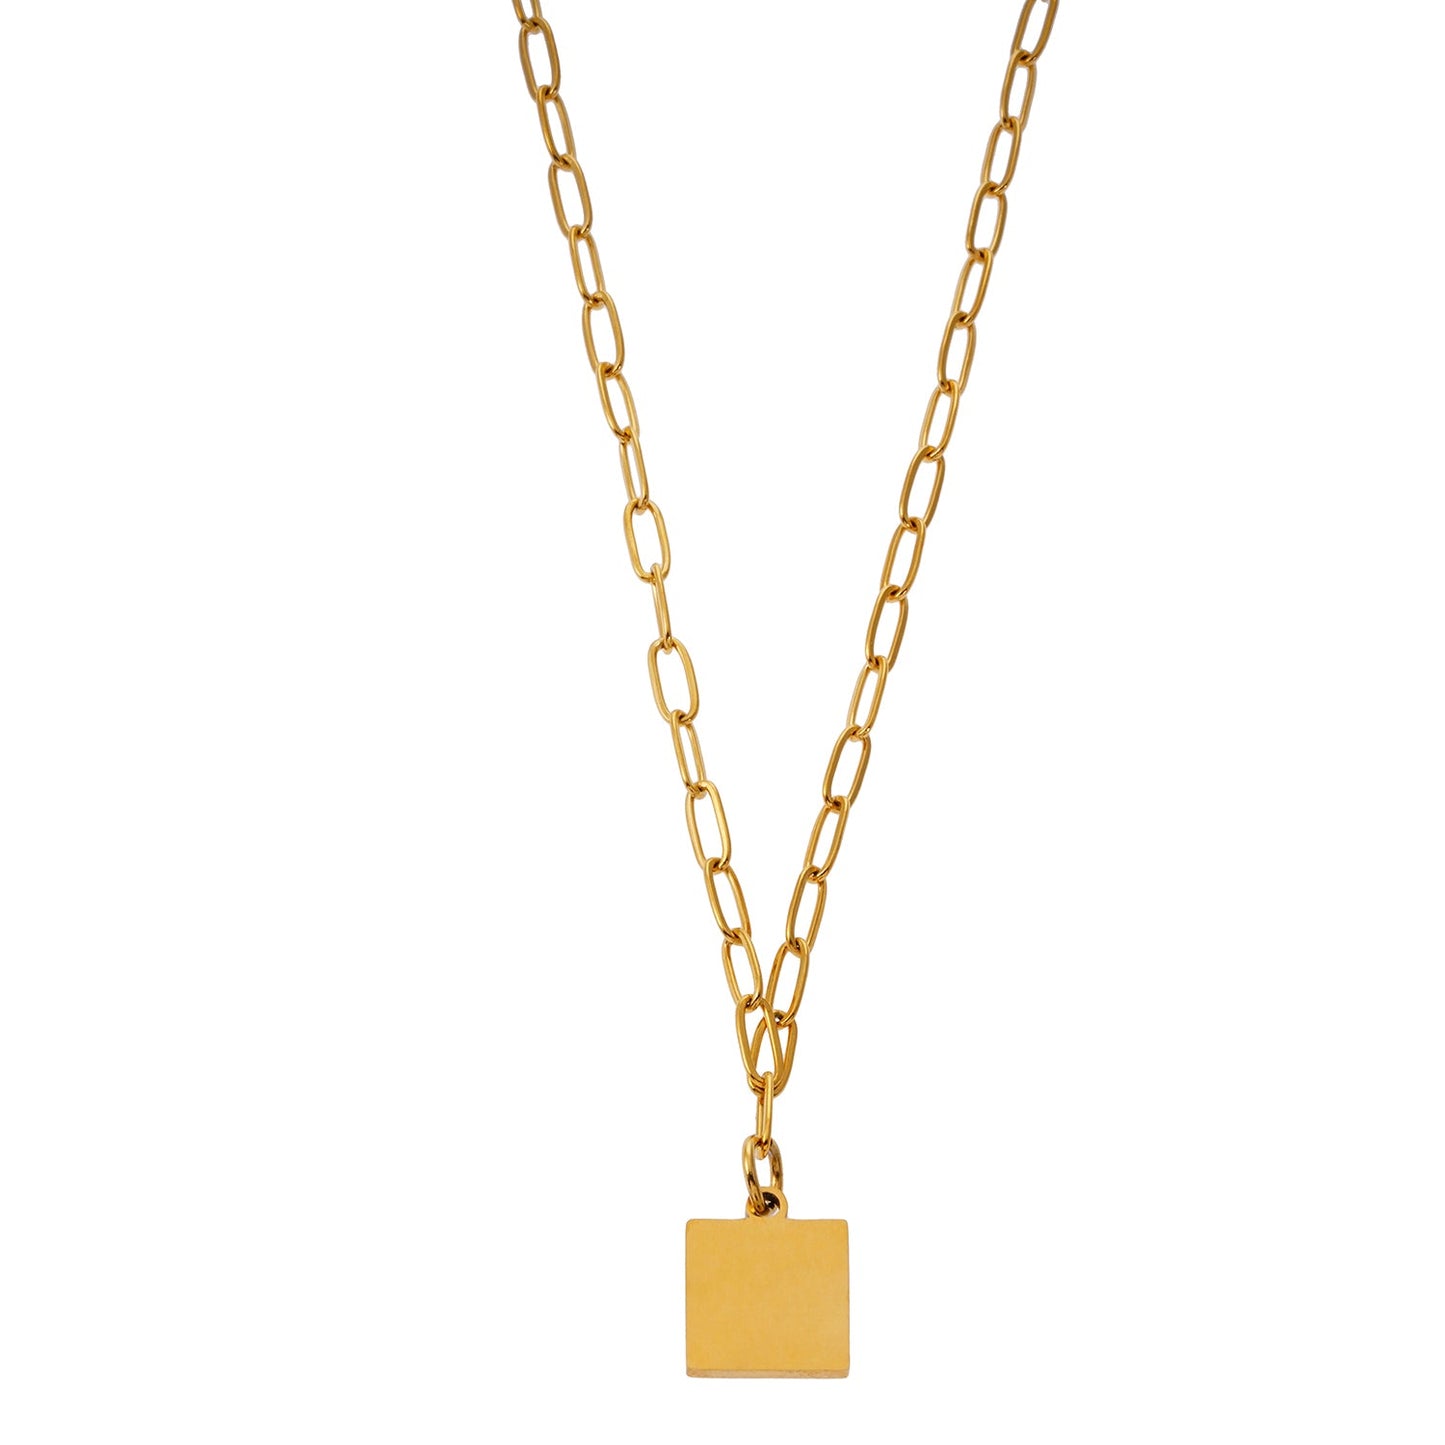 Style ANNABELLA 0092: Minimalist Metal & Shell Square Pendant on a Paper-Clip Chain Necklace.